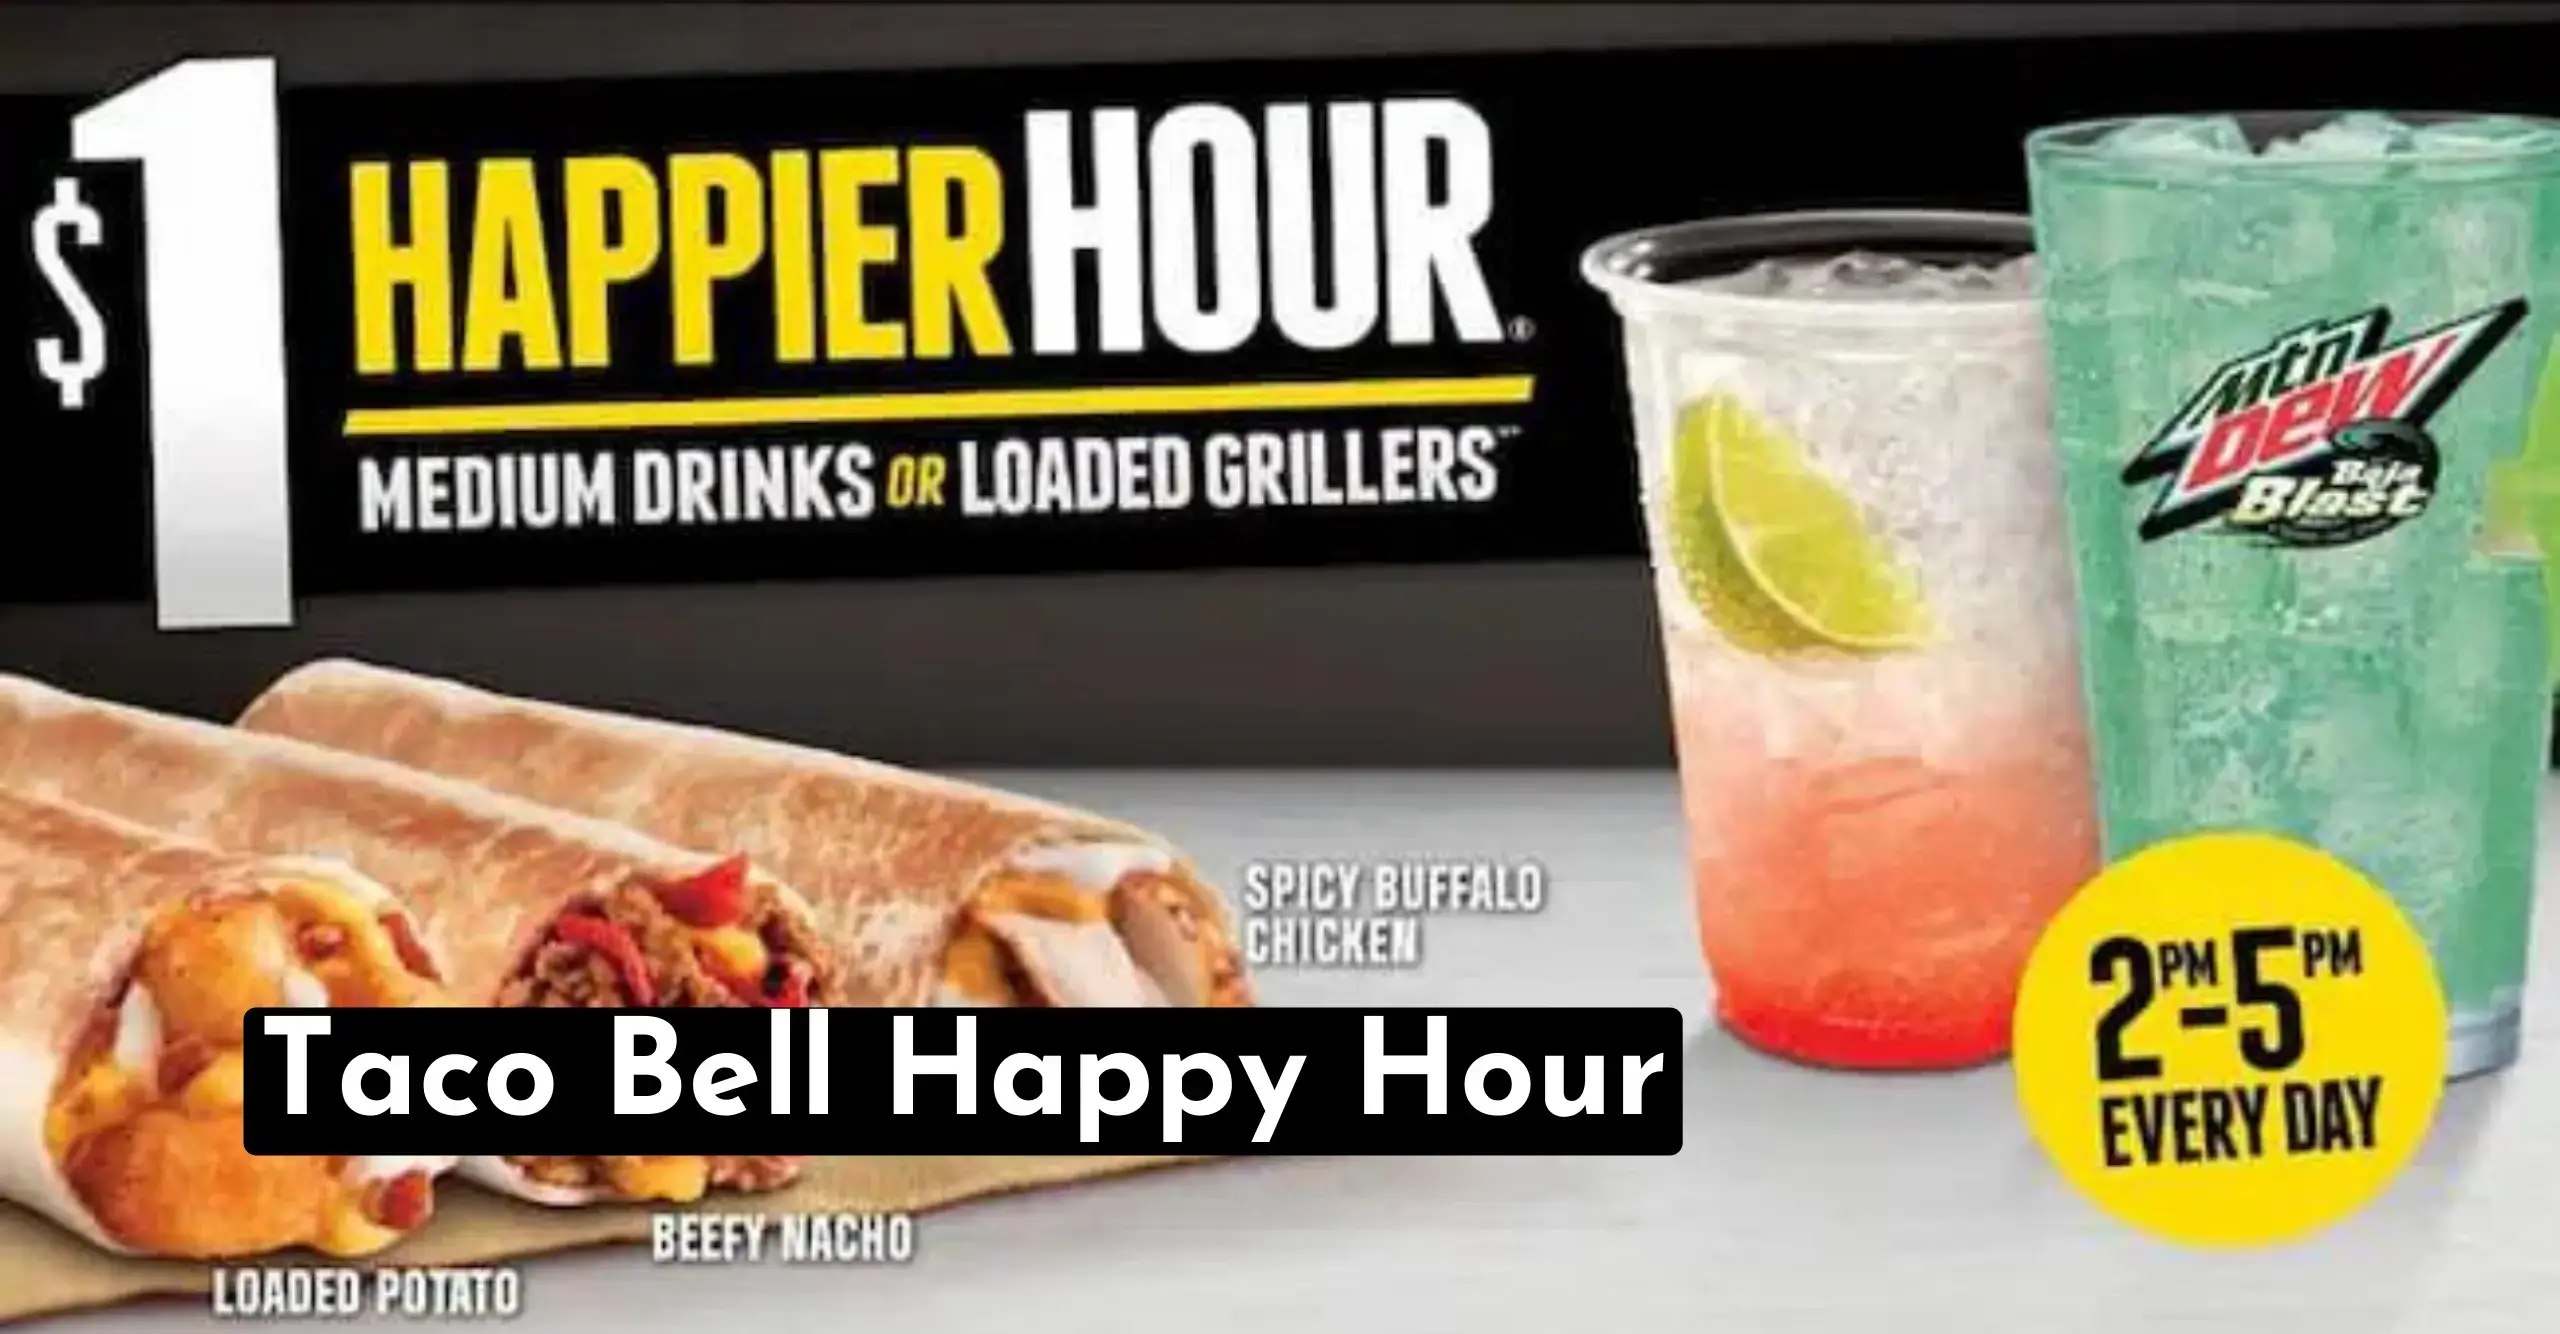 Taco Bell Happy Hour: Save big on drinks and freezes! Enjoy your favorite Taco Bell drinks and freezes for just $1 from 2-5pm daily.